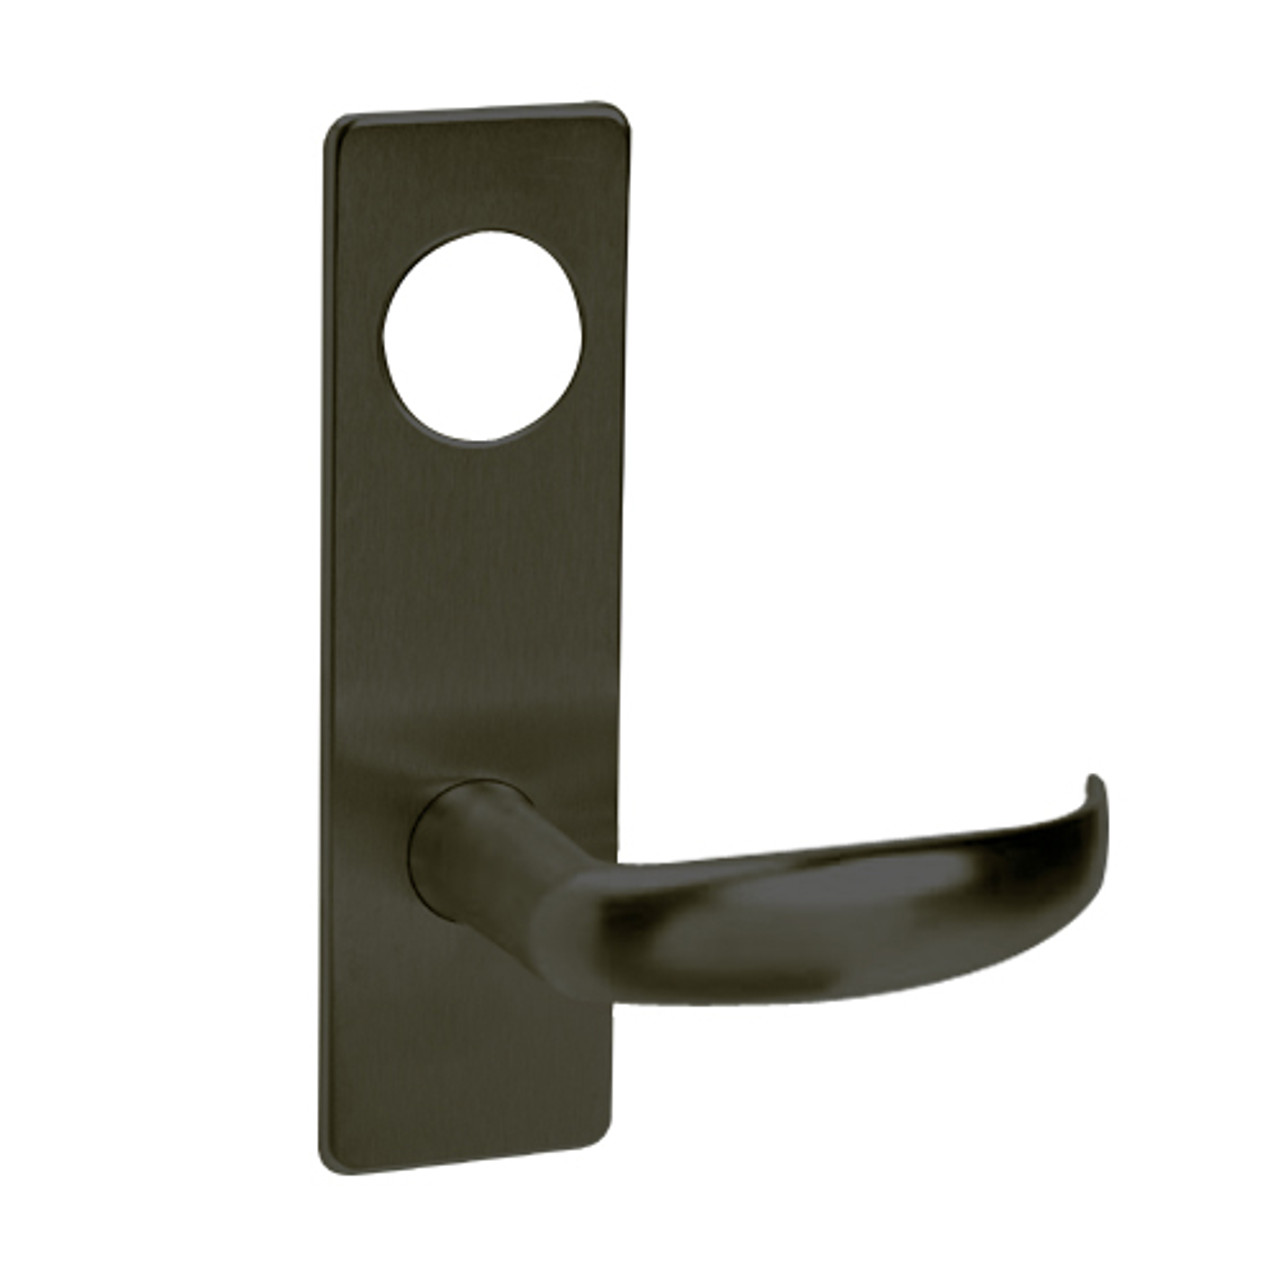 ML2032-PSP-613-LC Corbin Russwin ML2000 Series Mortise Institution Locksets with Princeton Lever in Oil Rubbed Bronze